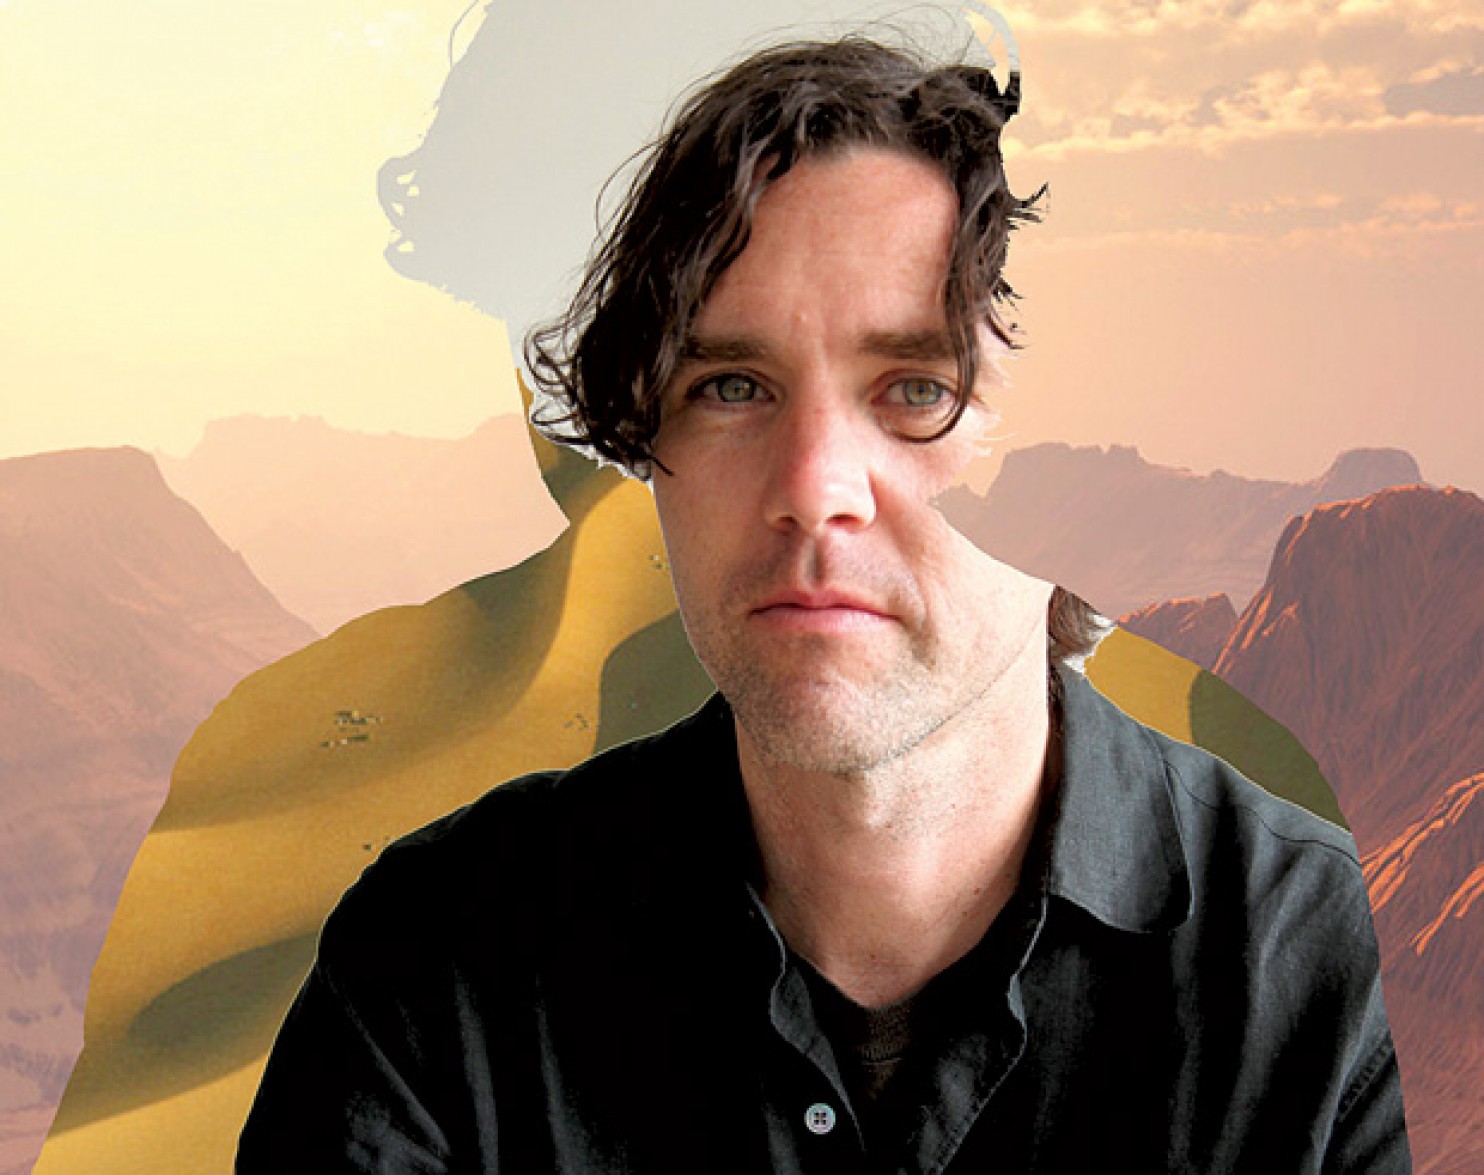 Cass McCombs streams single from 'Mangy Love'. The track comes off his release 'Mangy Love'